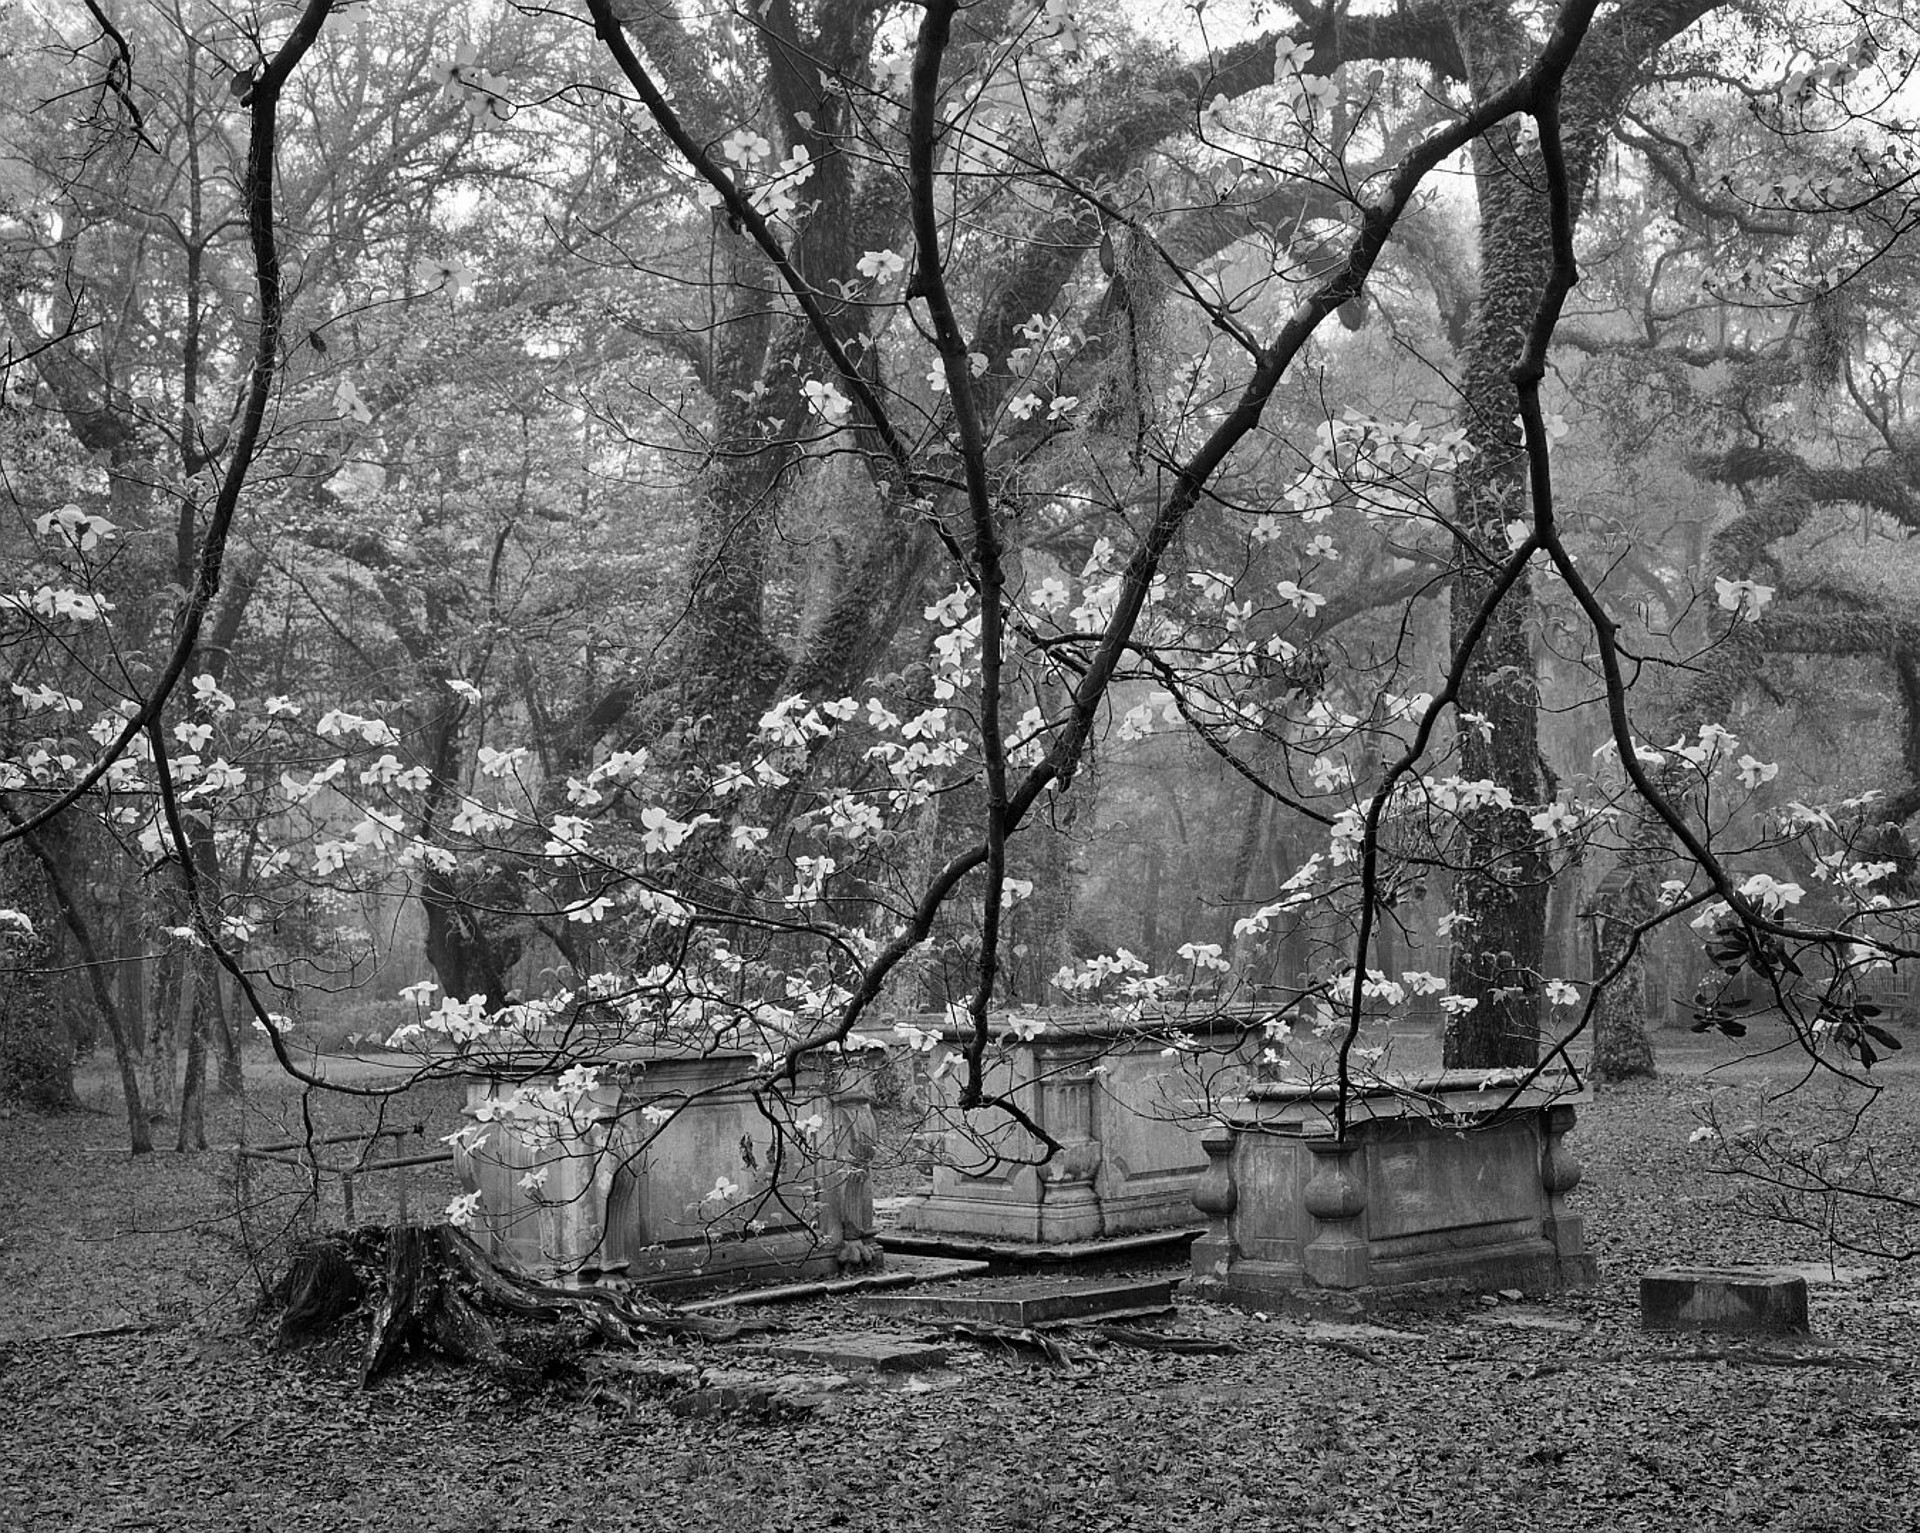 (#205) Dogwood Blossoms and Graves, Sheldon Church Ruins (1999) by Frank Hunter